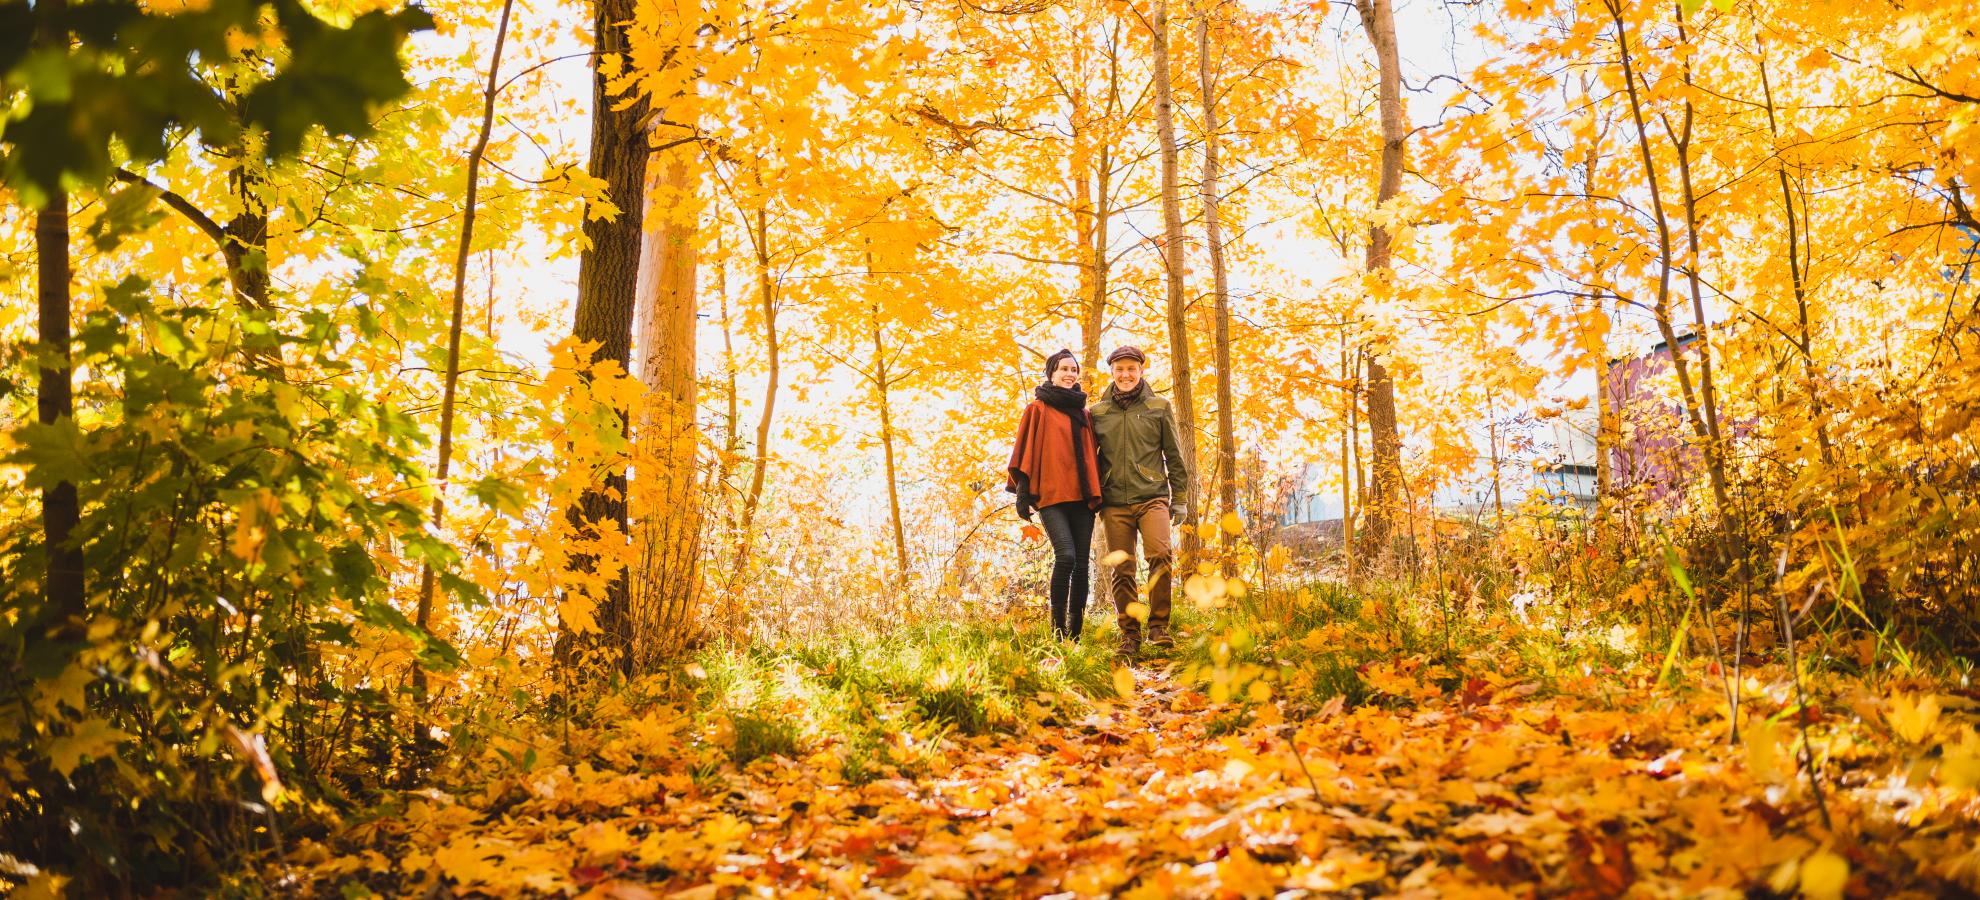 Couple walking in the forest during fall foliage.